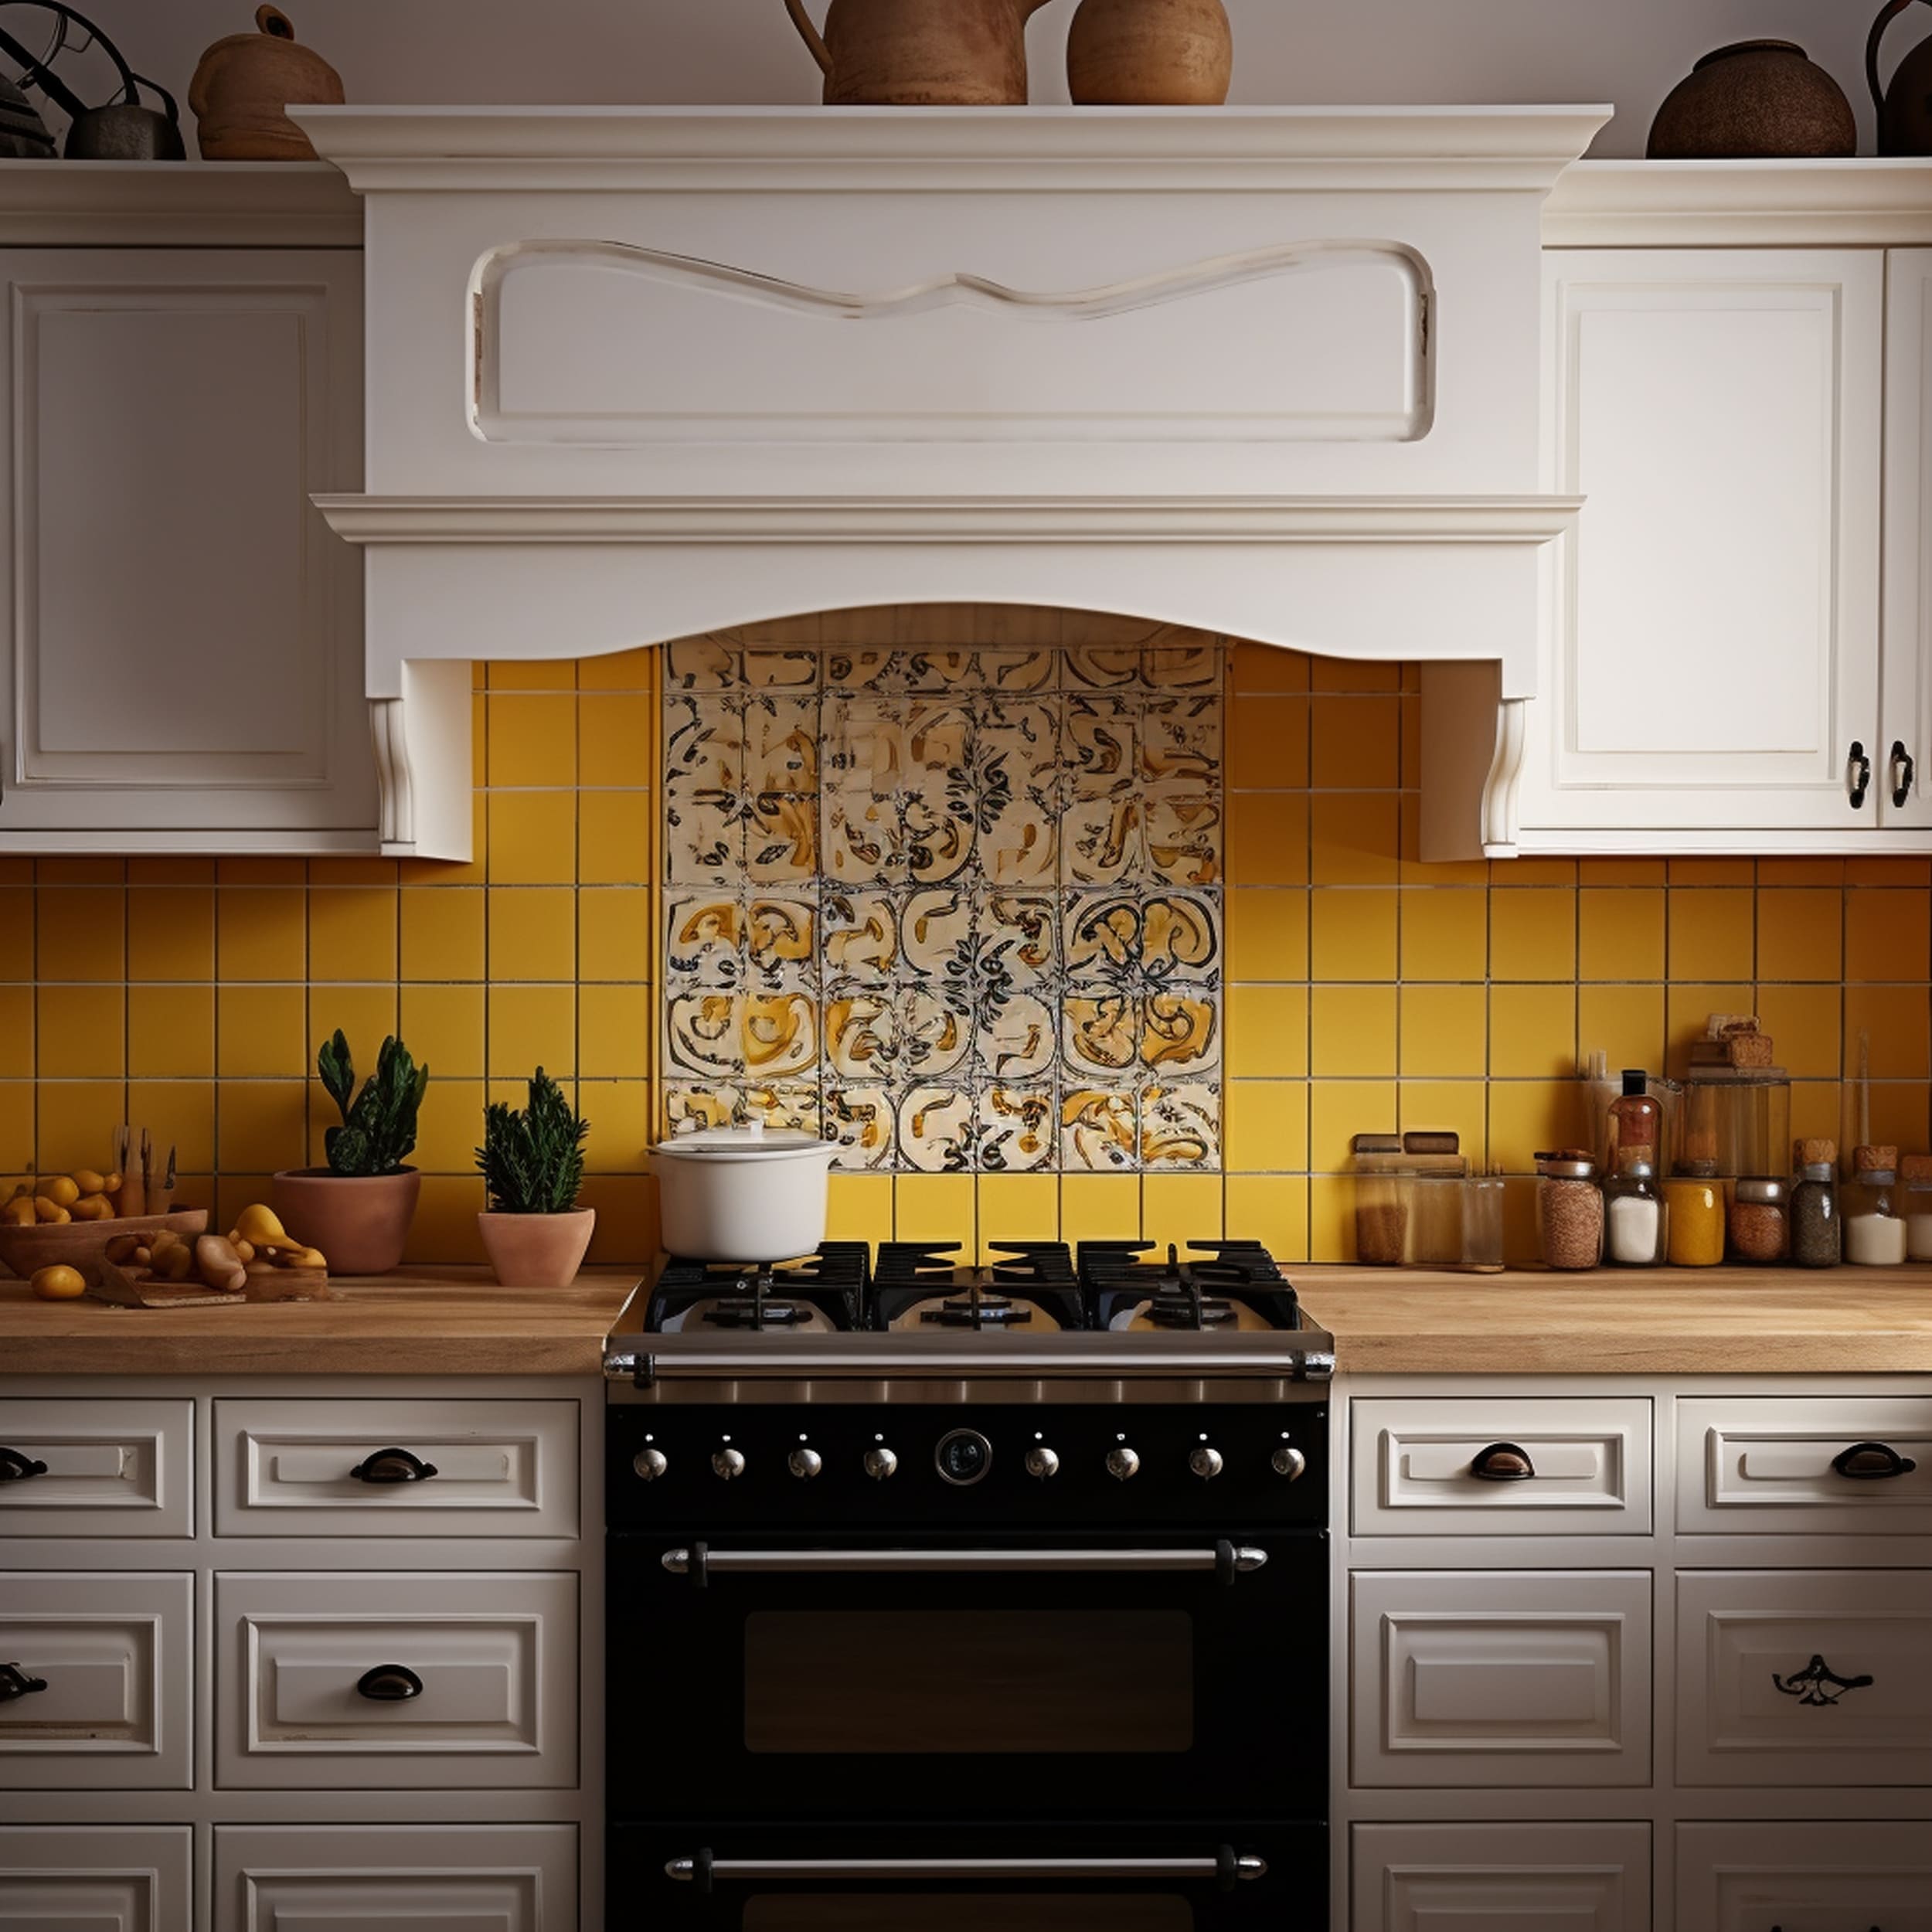 A Traditional Kitchen With a Bright Yellow Backsplash and a Black Stove